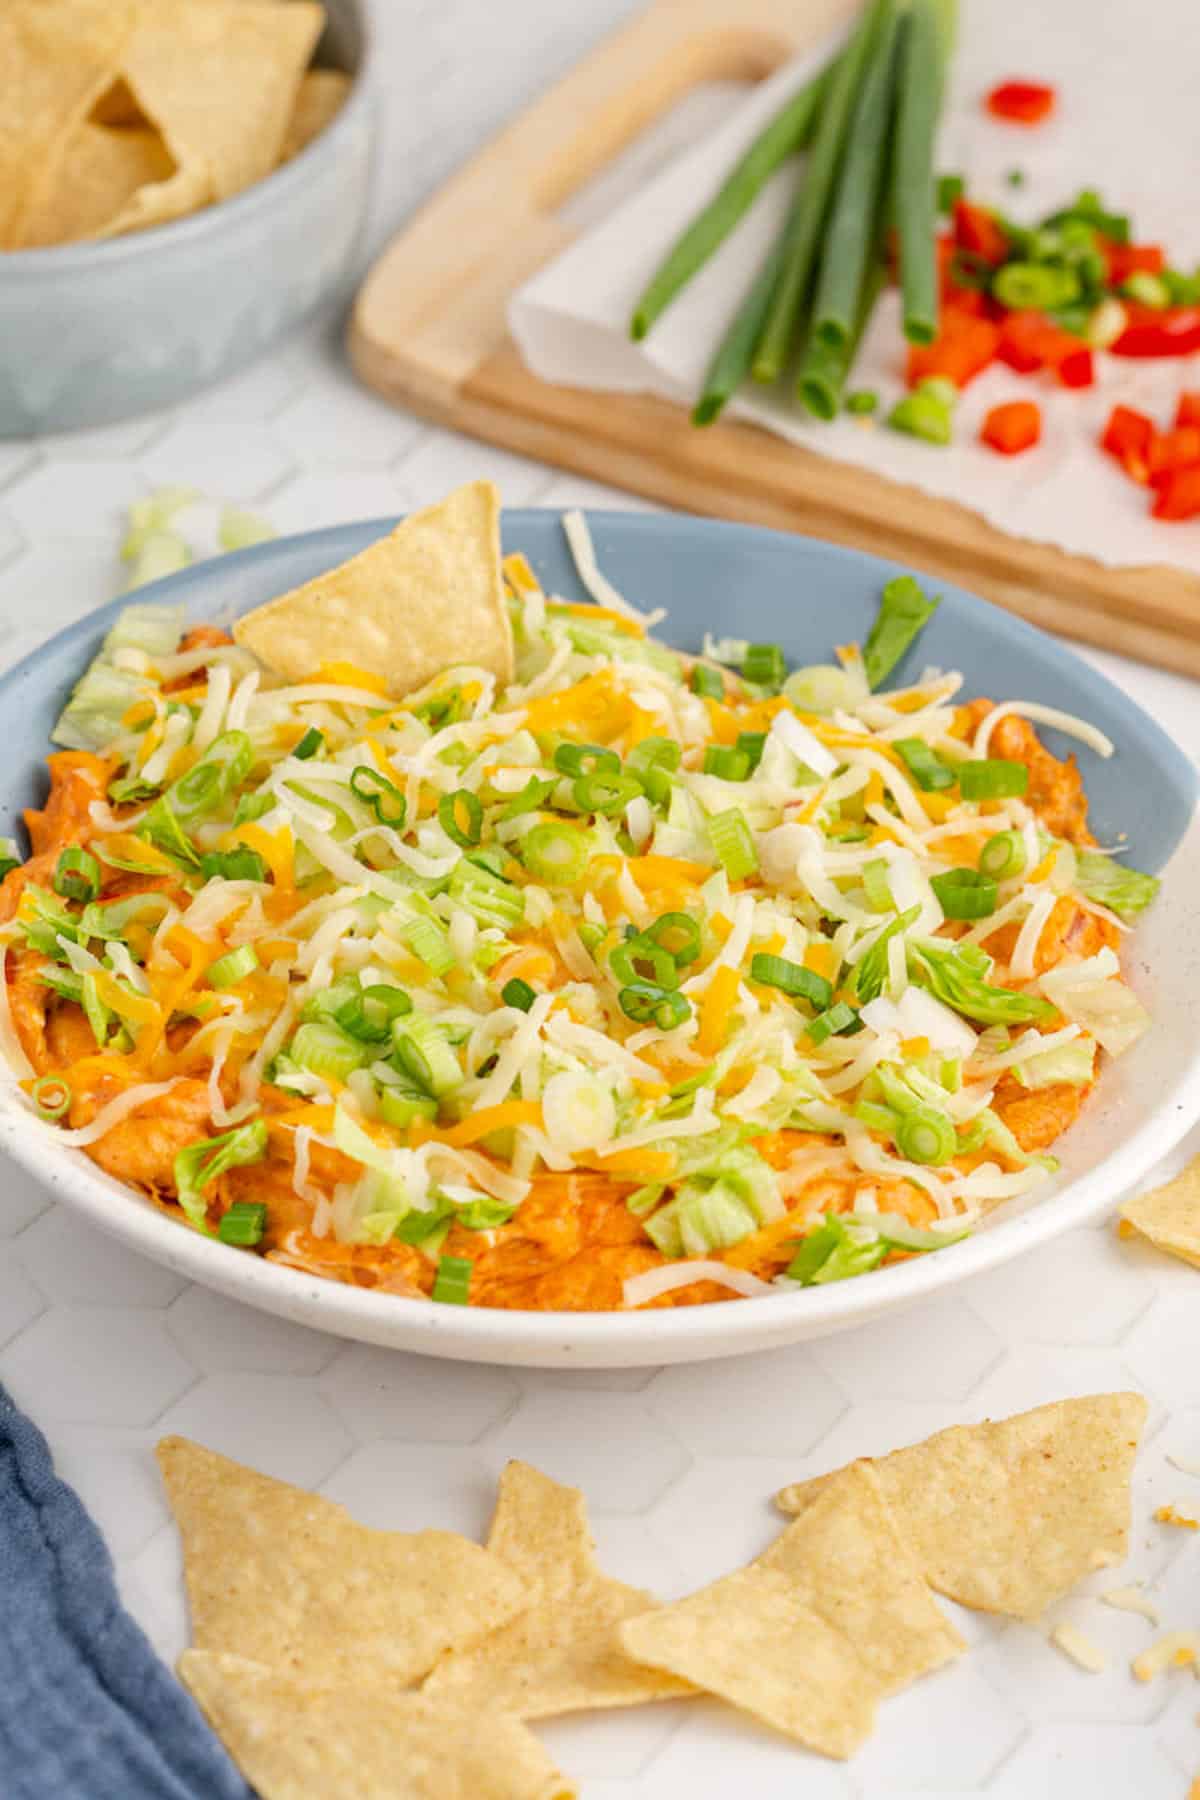 A hot dip of buffalo chicken served with tortilla chips.